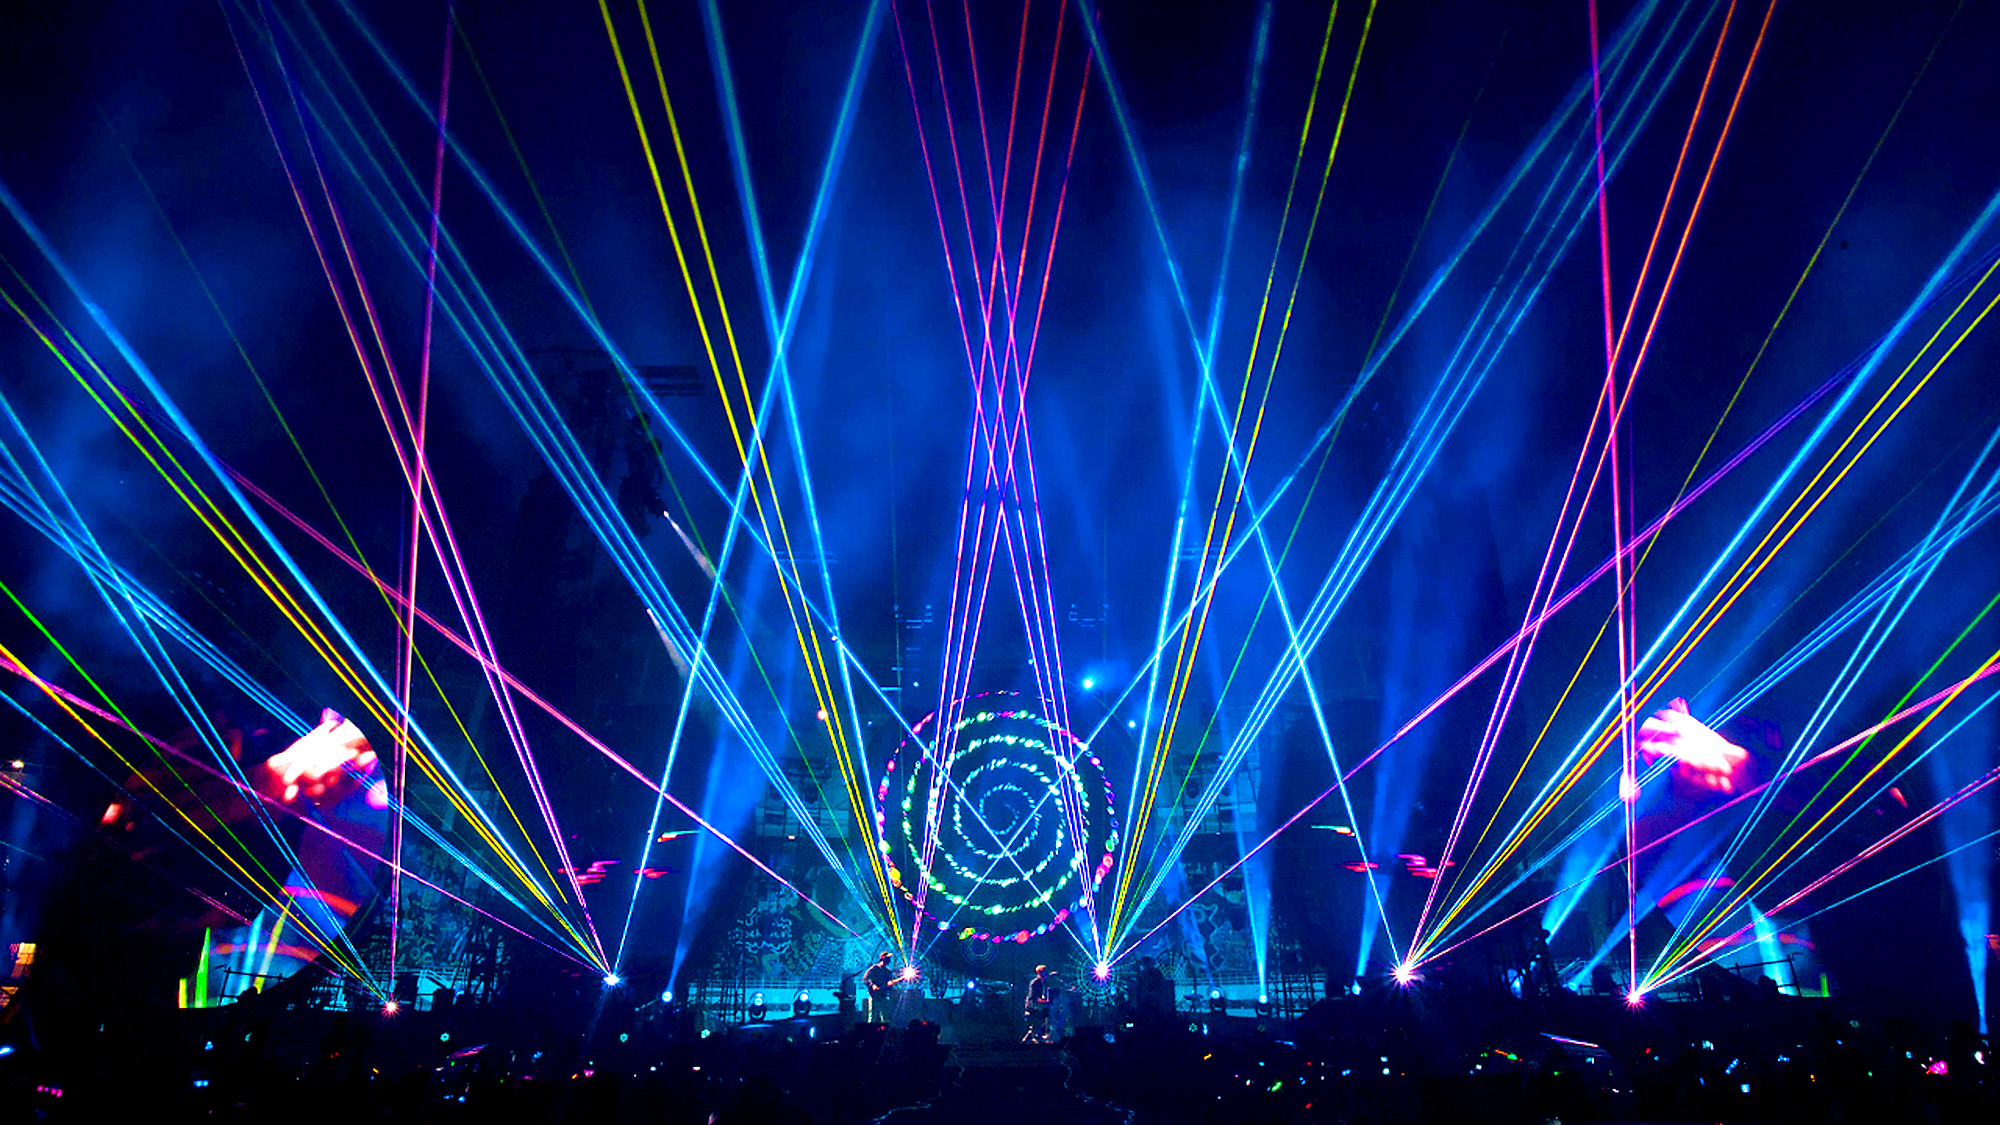 lasers-enhance-fans-experiences-with-aerial-effects-at-coldplay-s